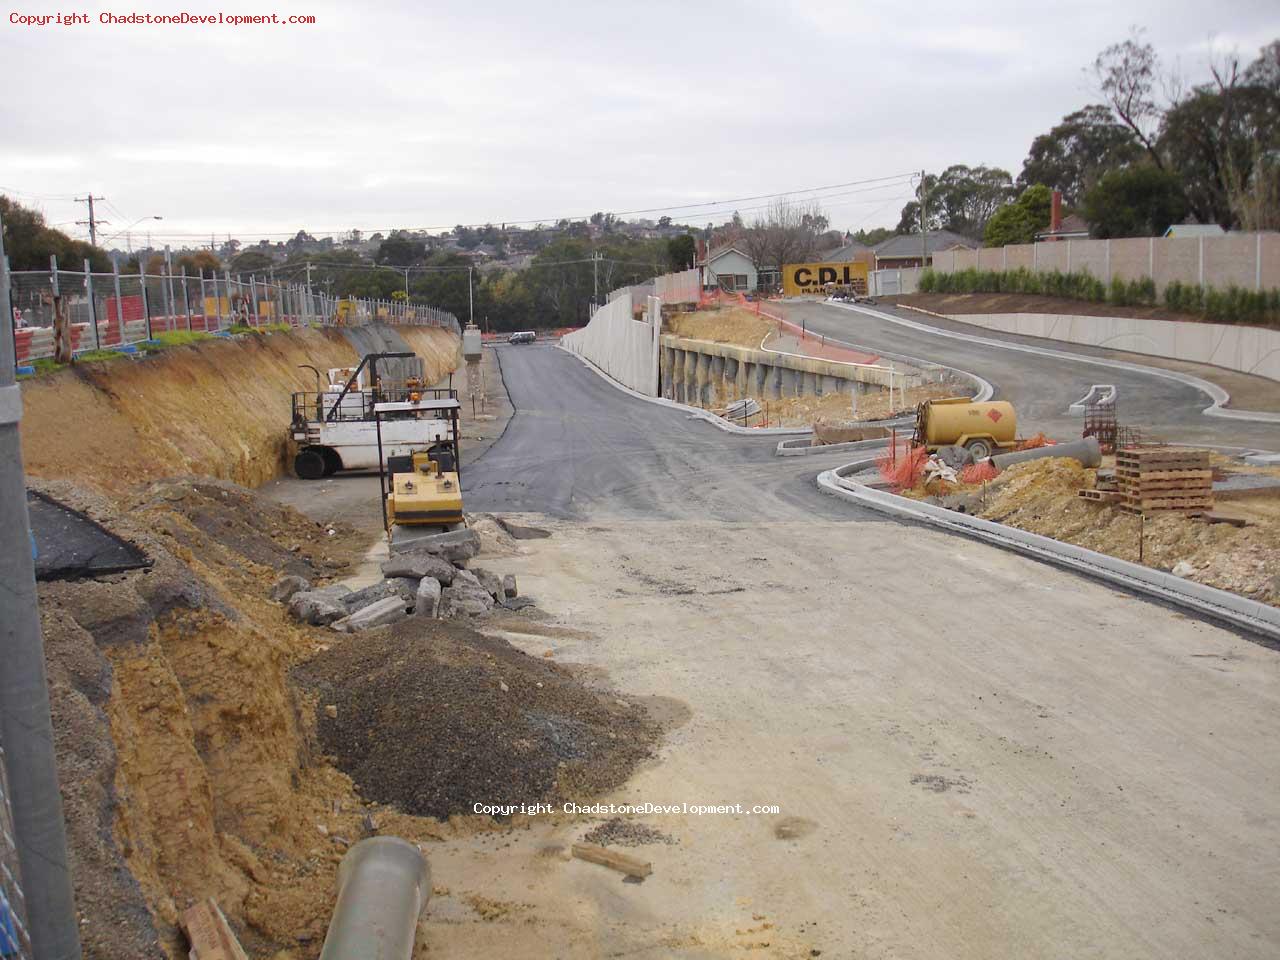 New bitumen almost fully laid along middle rd underpass - Chadstone Development Discussions